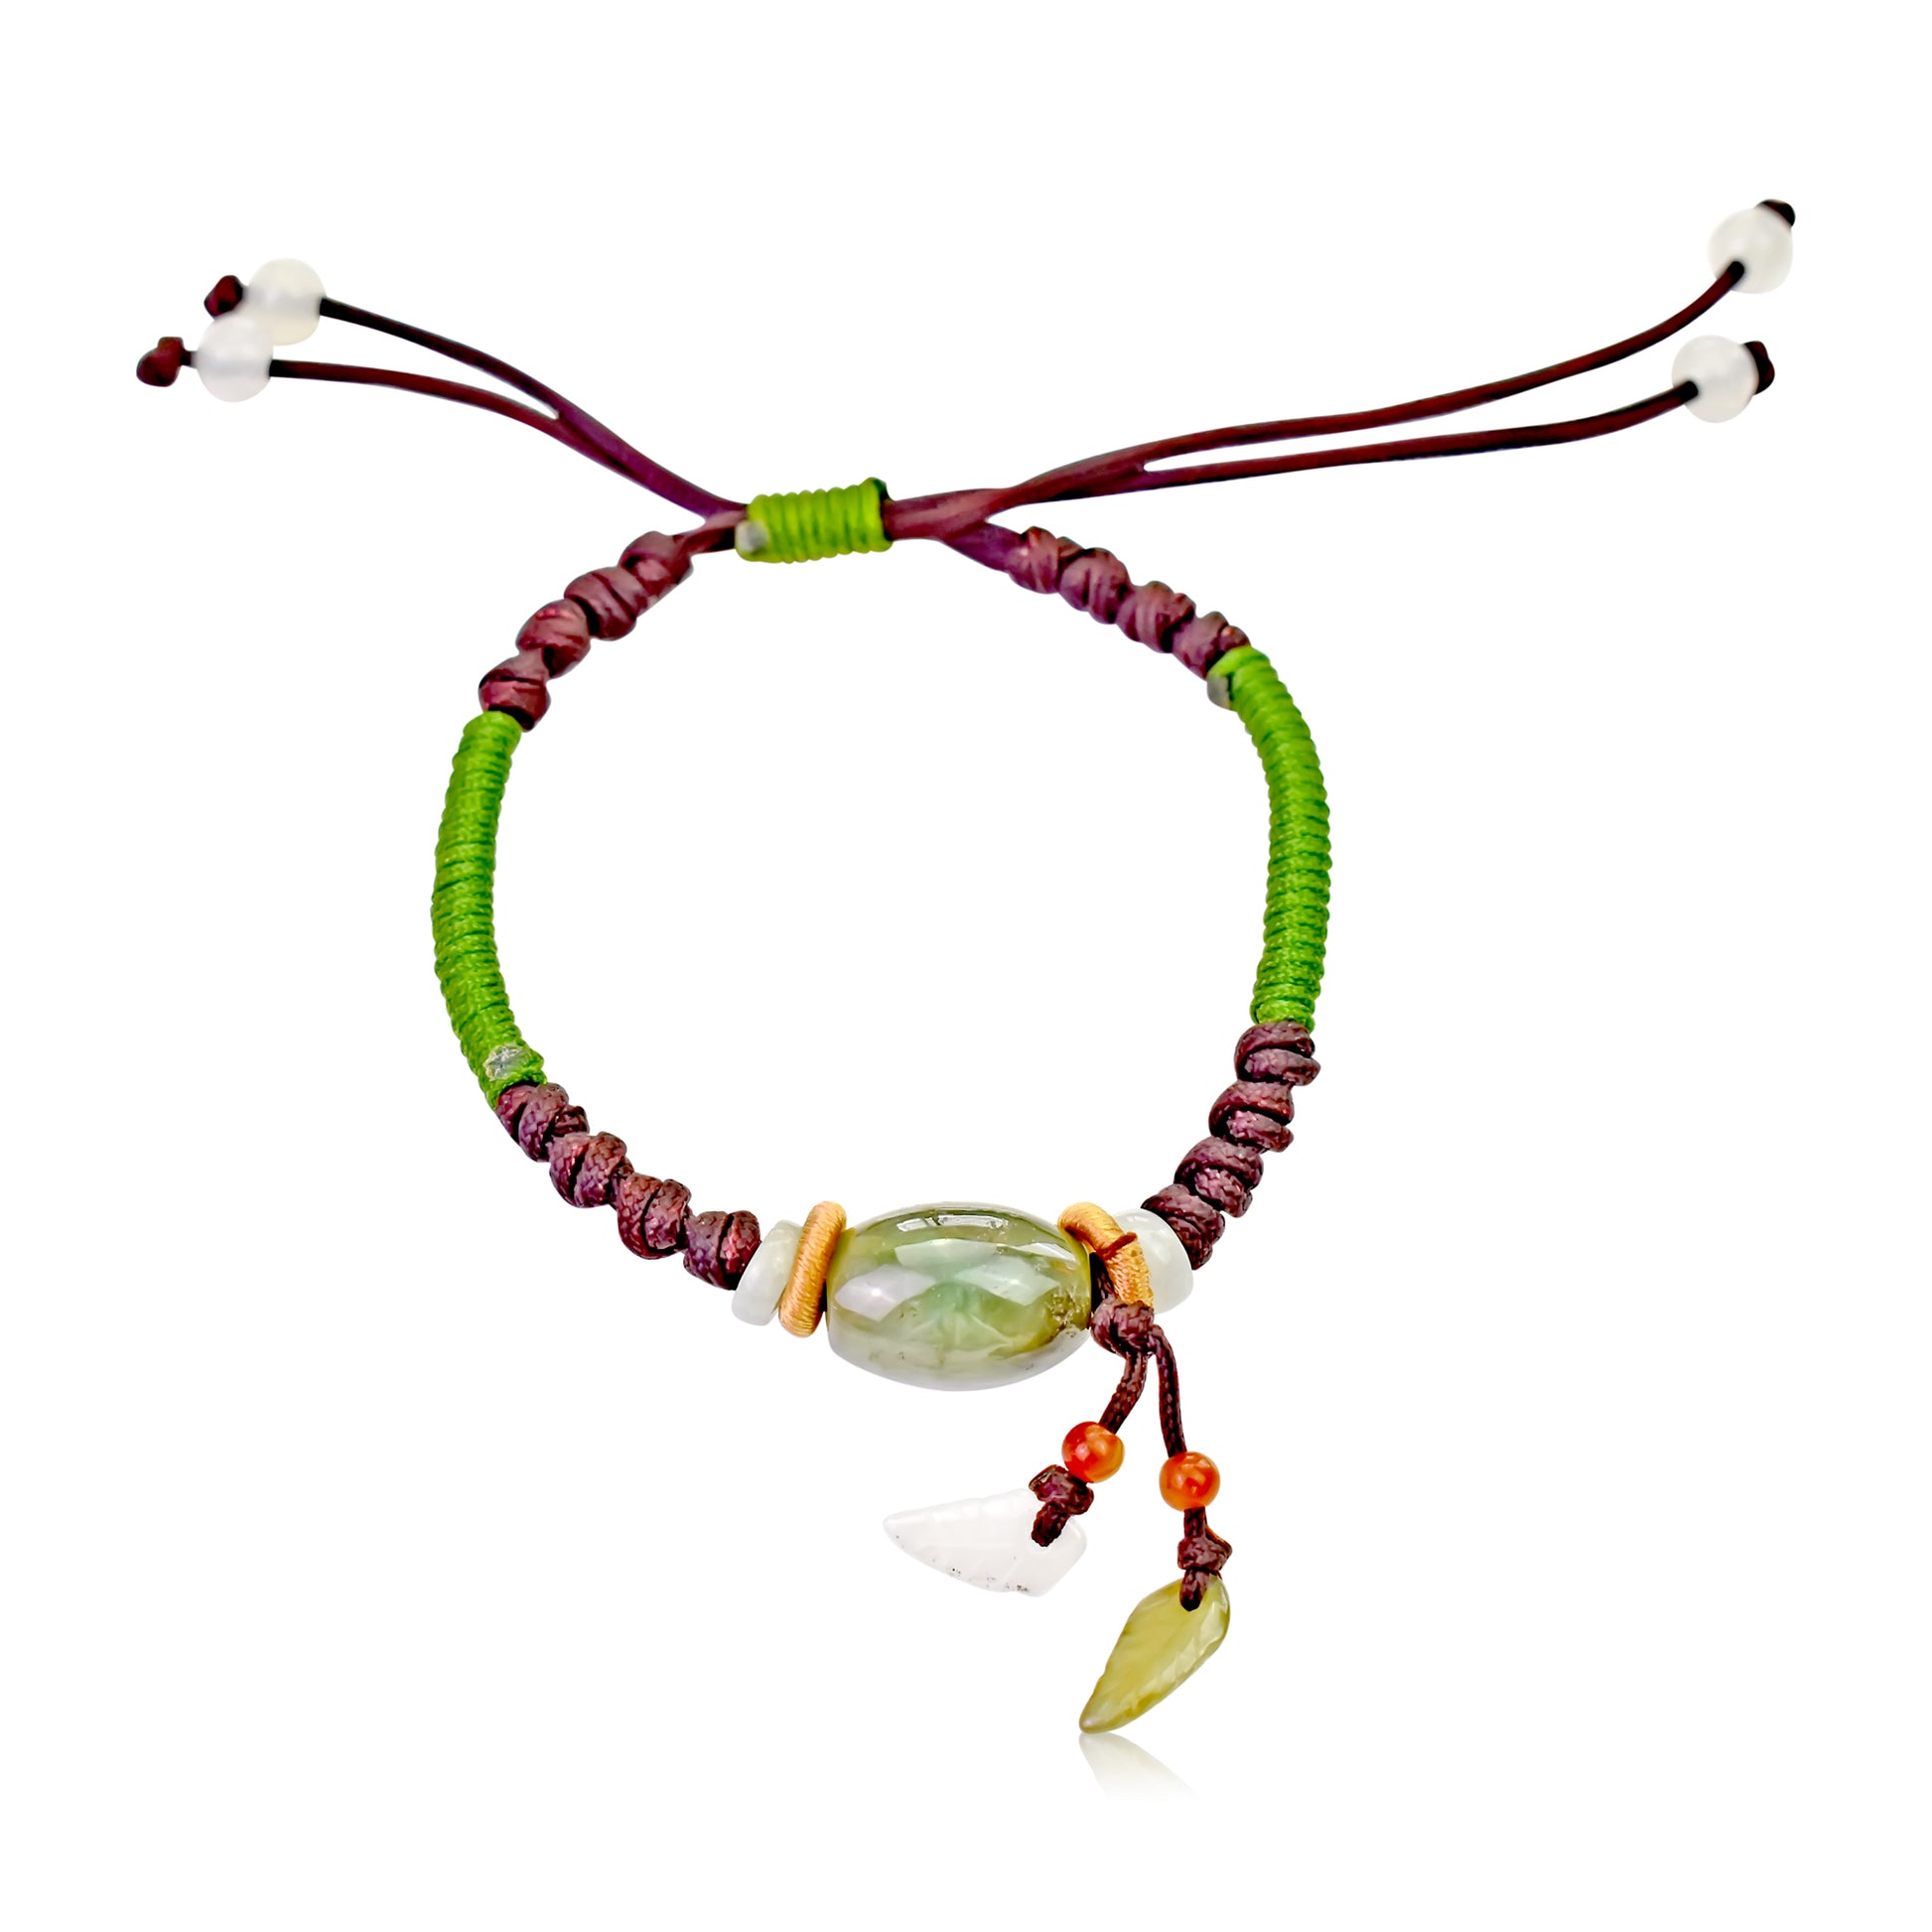 Show Off Your Personal Style with Cute Oblong Shaped Beads Jade Bracelet